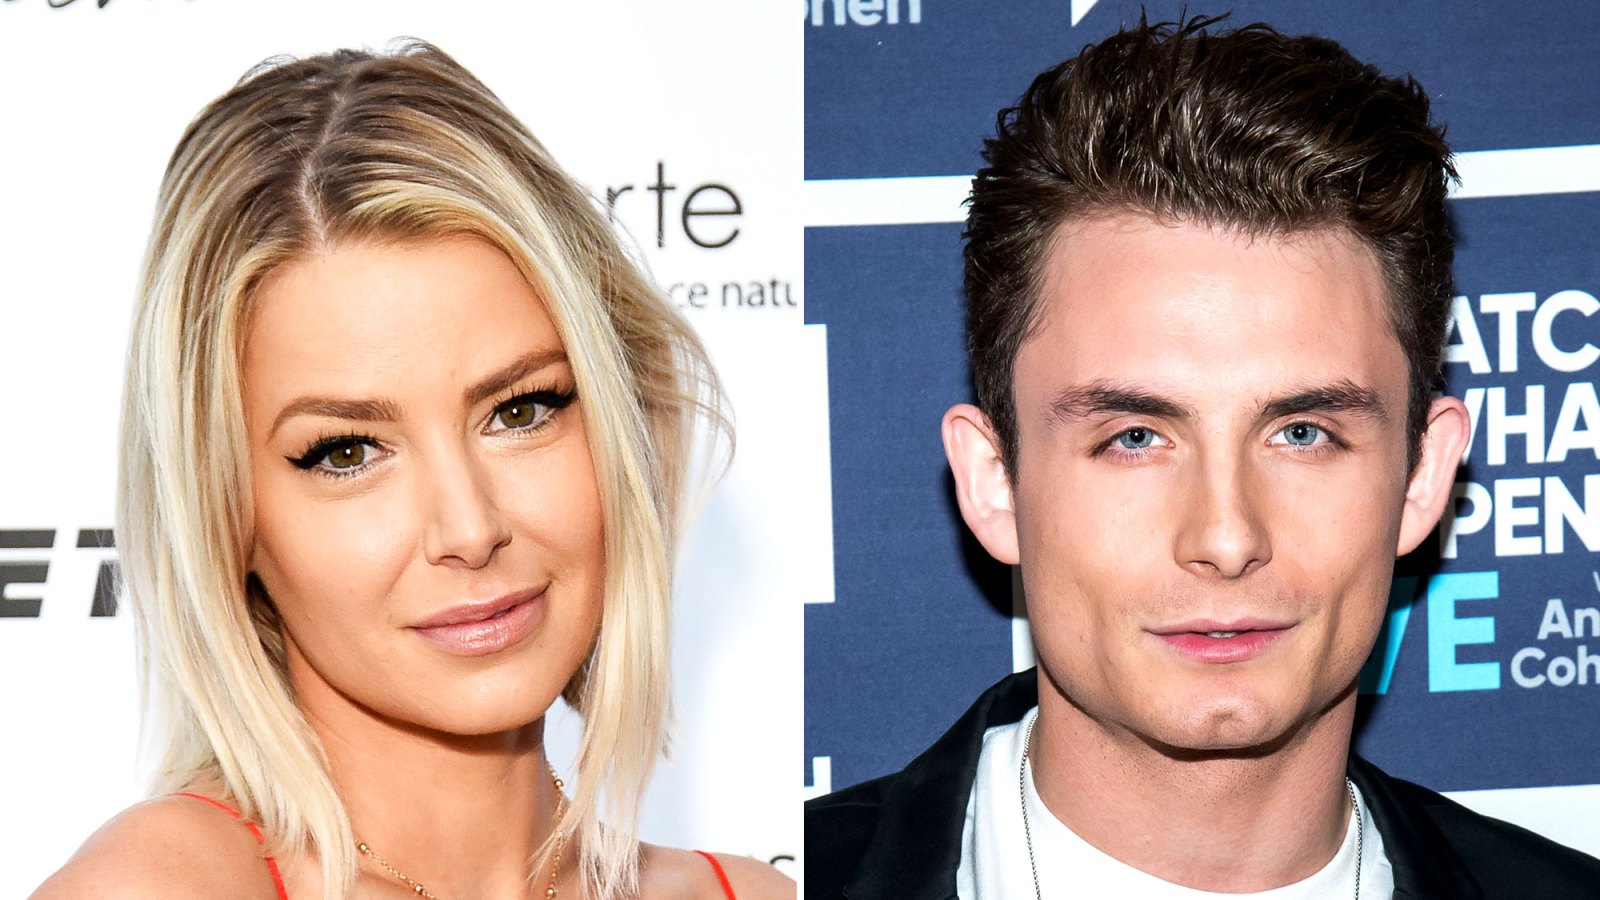 Vanderpump Rules’ Ariana Madix Say James Kennedy Would ‘Benefit’ From Going to Therapy